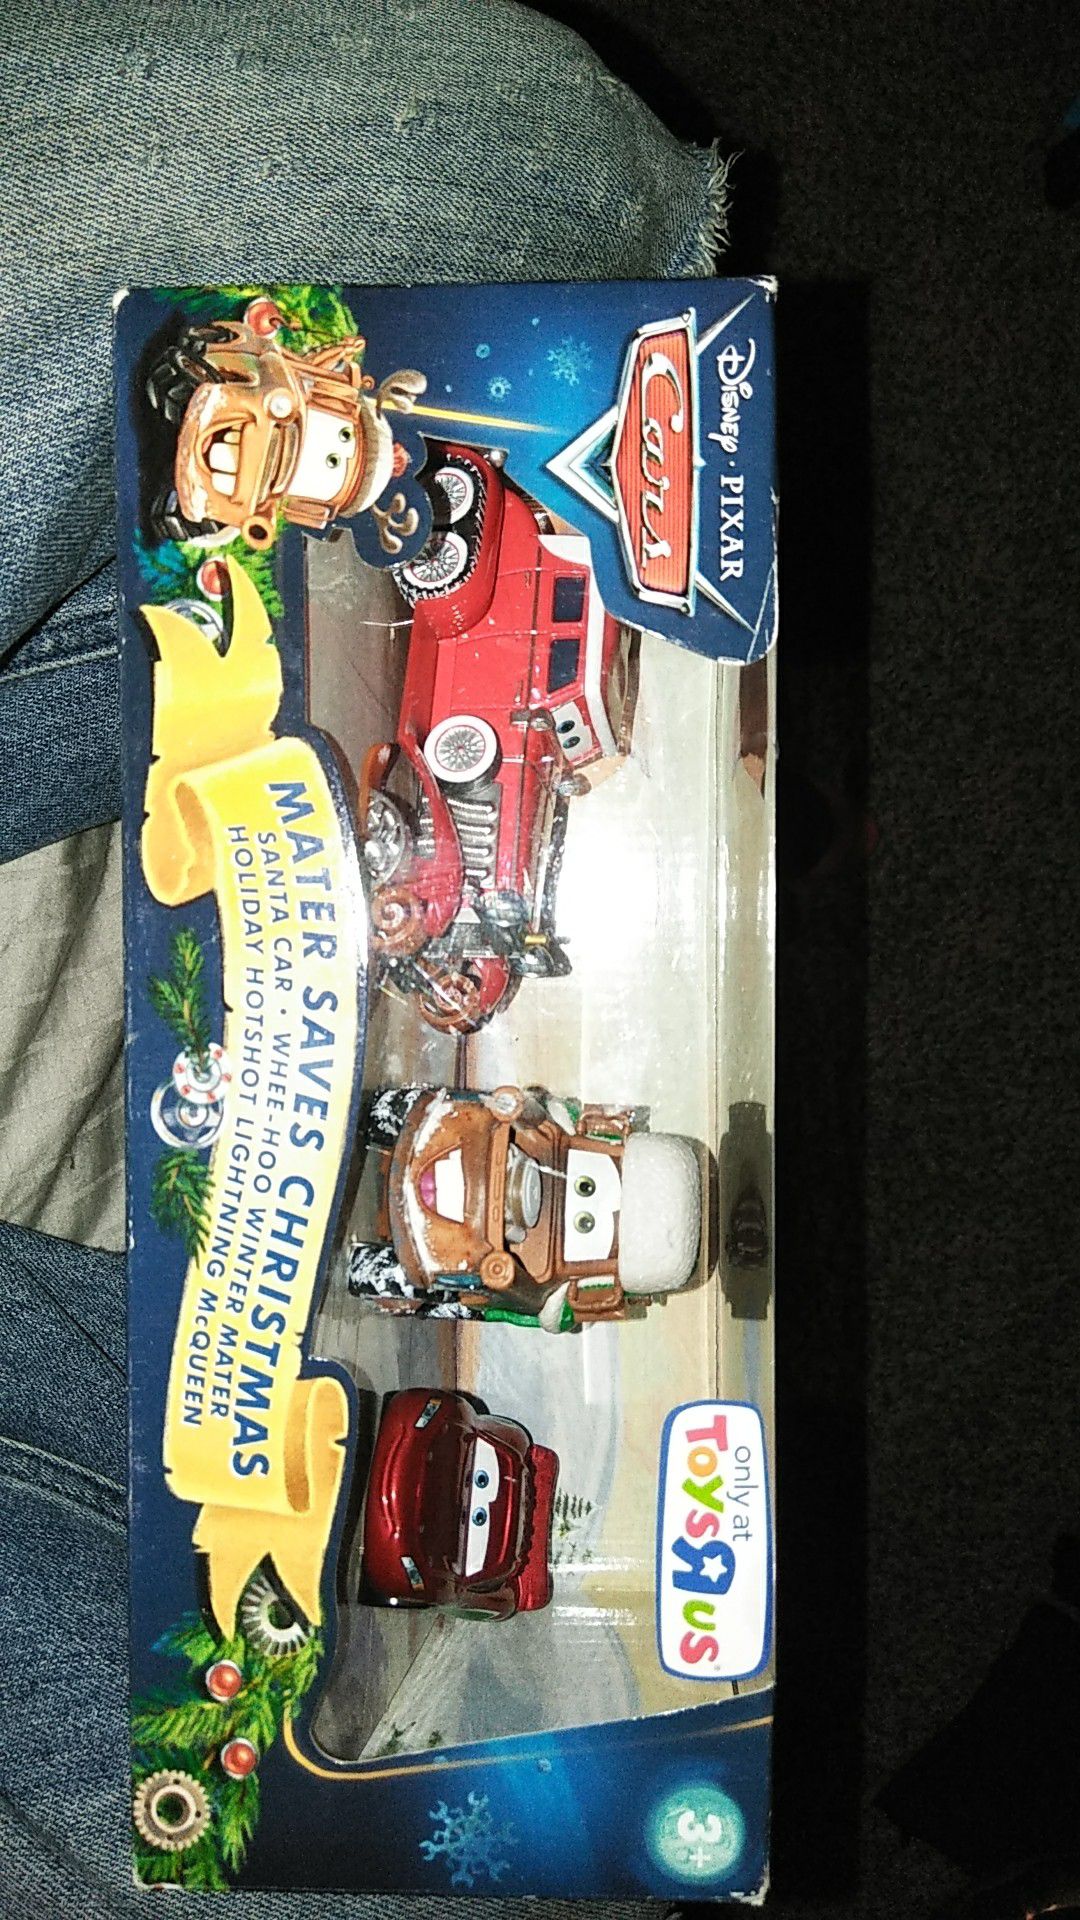 Cars Christmas collectable from 2010 toys R us exclusive and now they out of business 😂